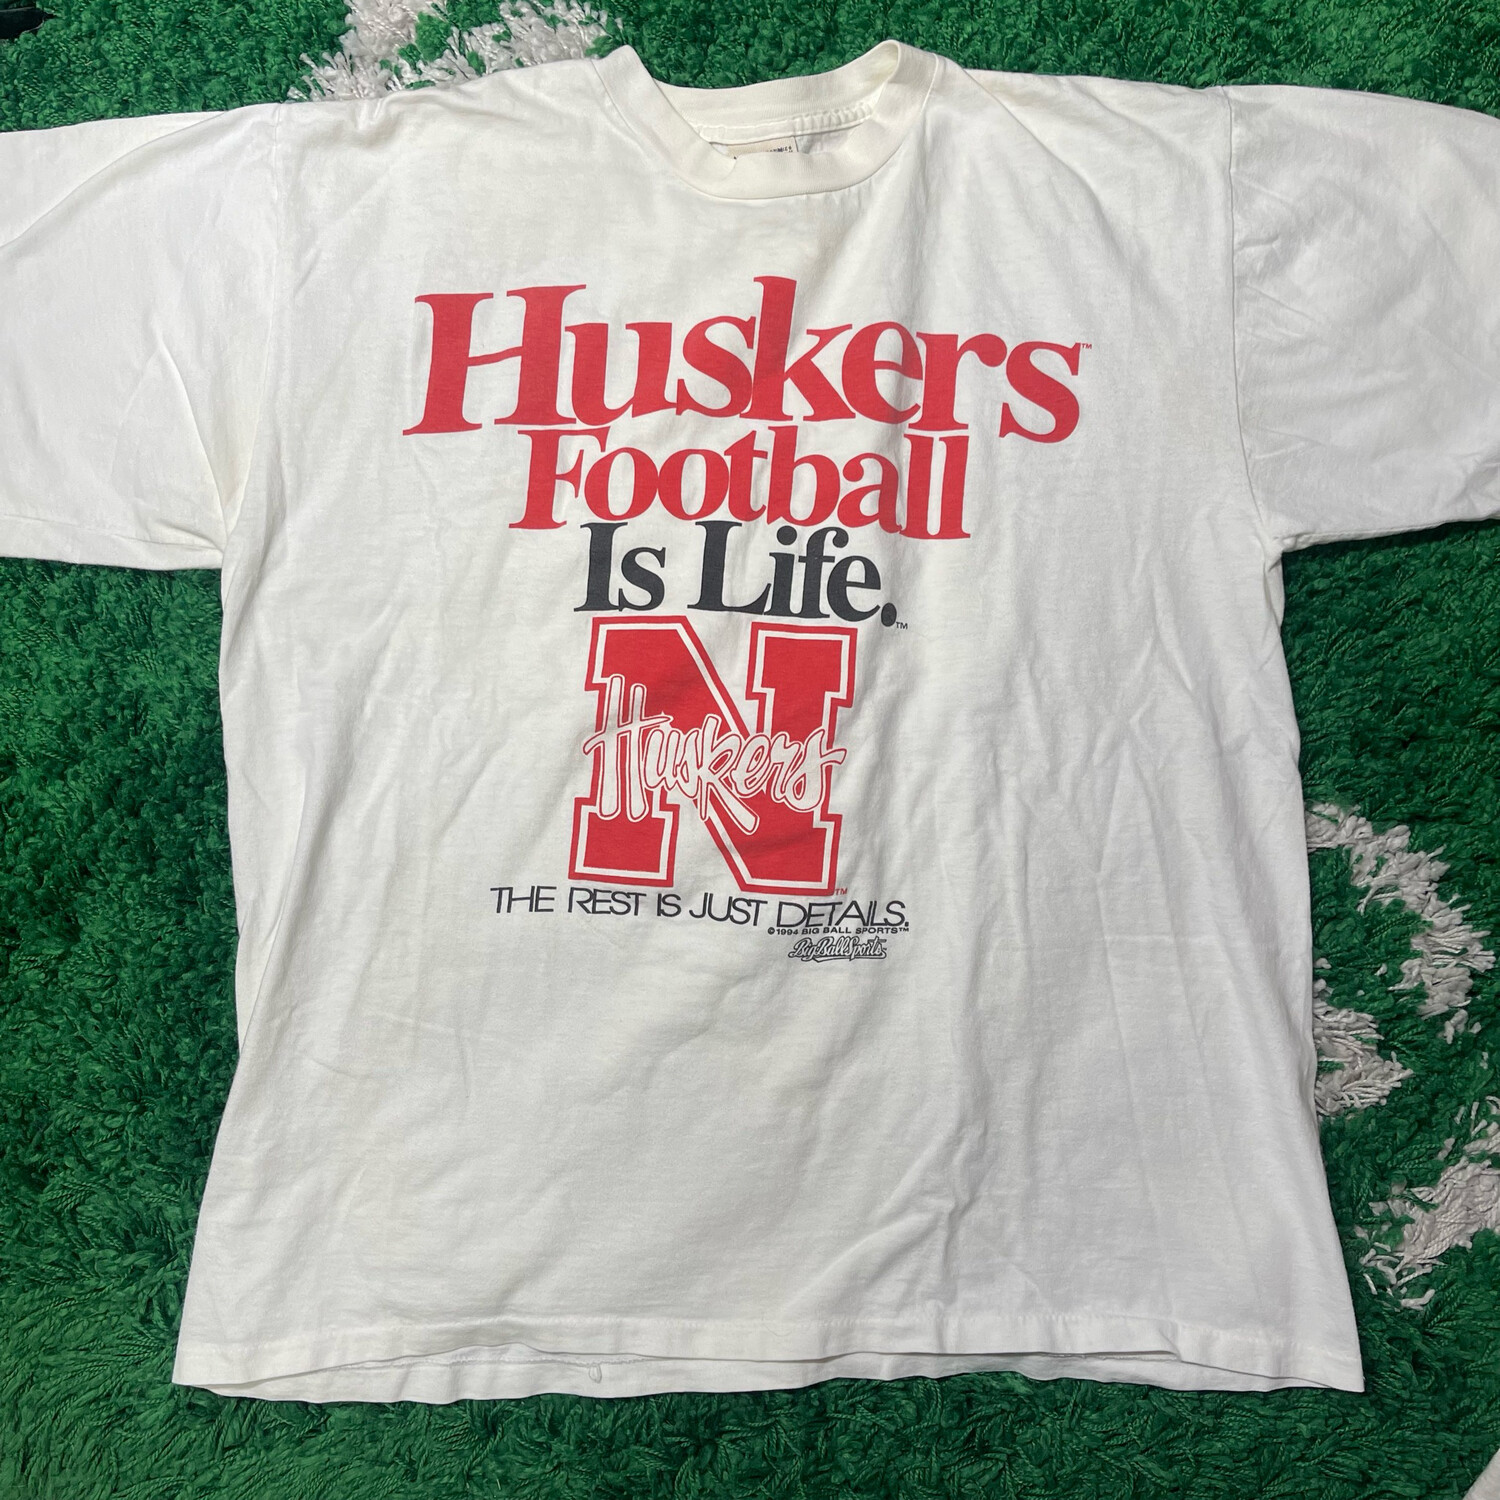 Huskers Football Is Life Tee Size XL